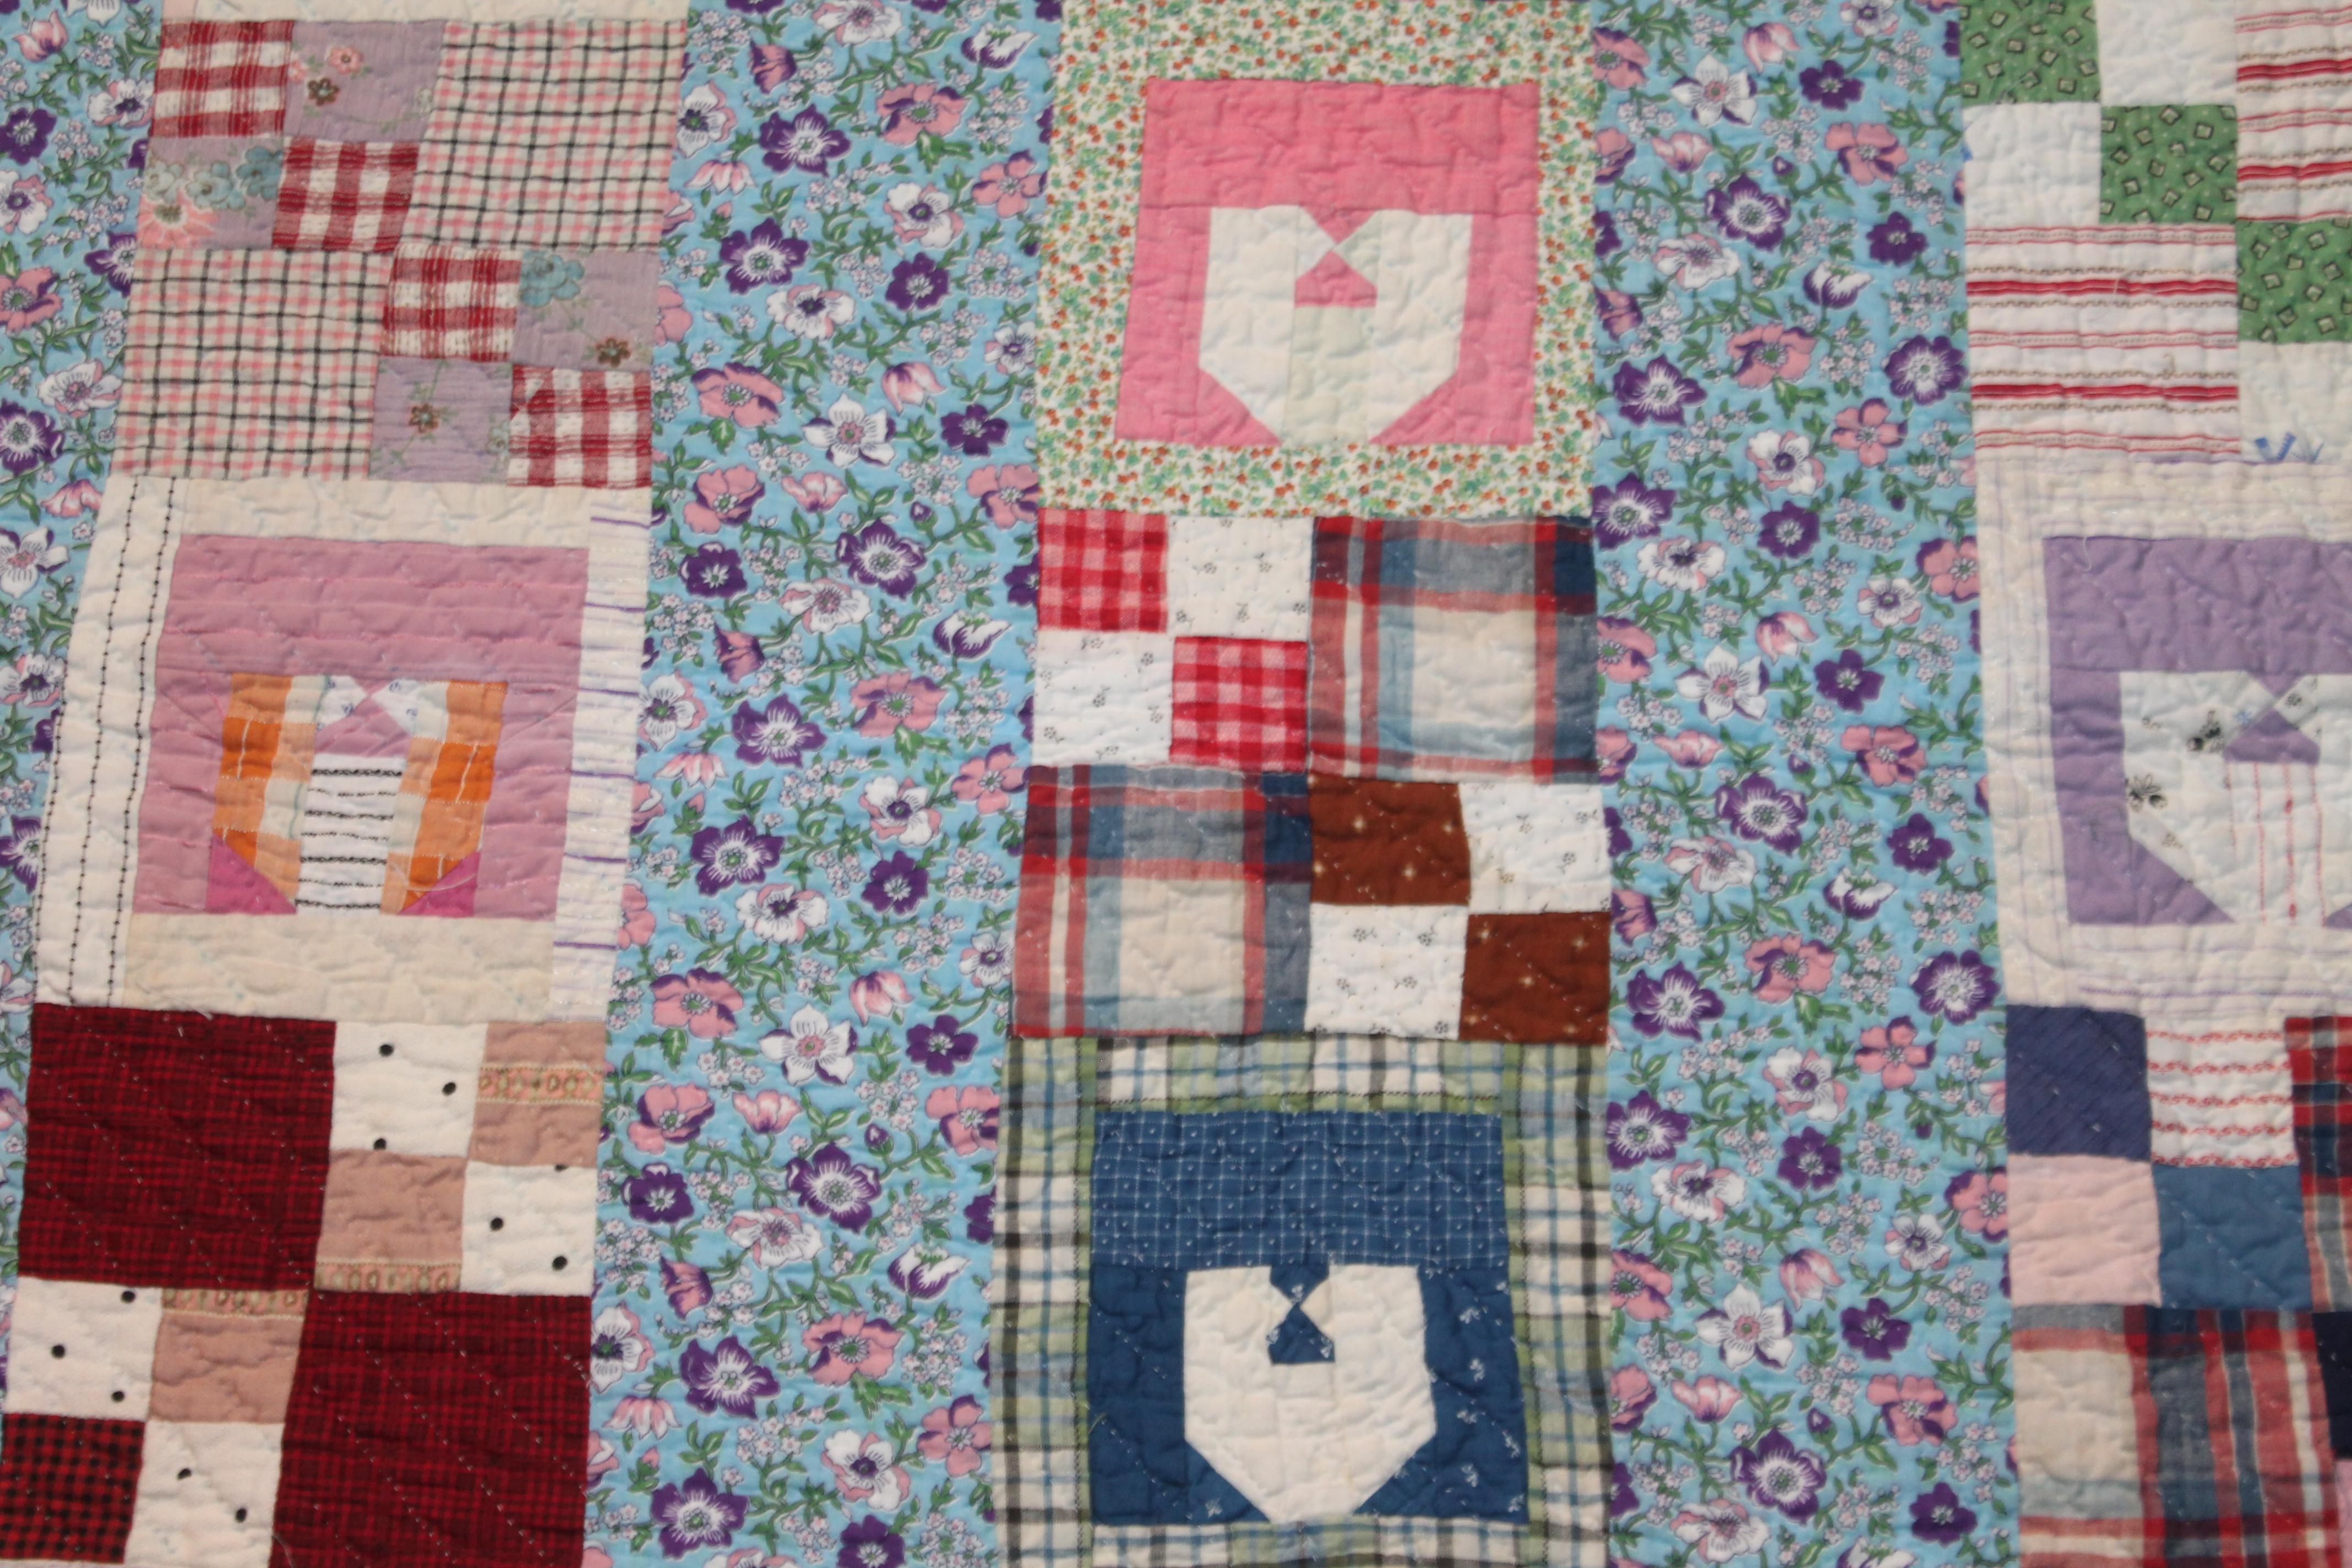 Hand-Crafted Antique Quilt with the Letter 